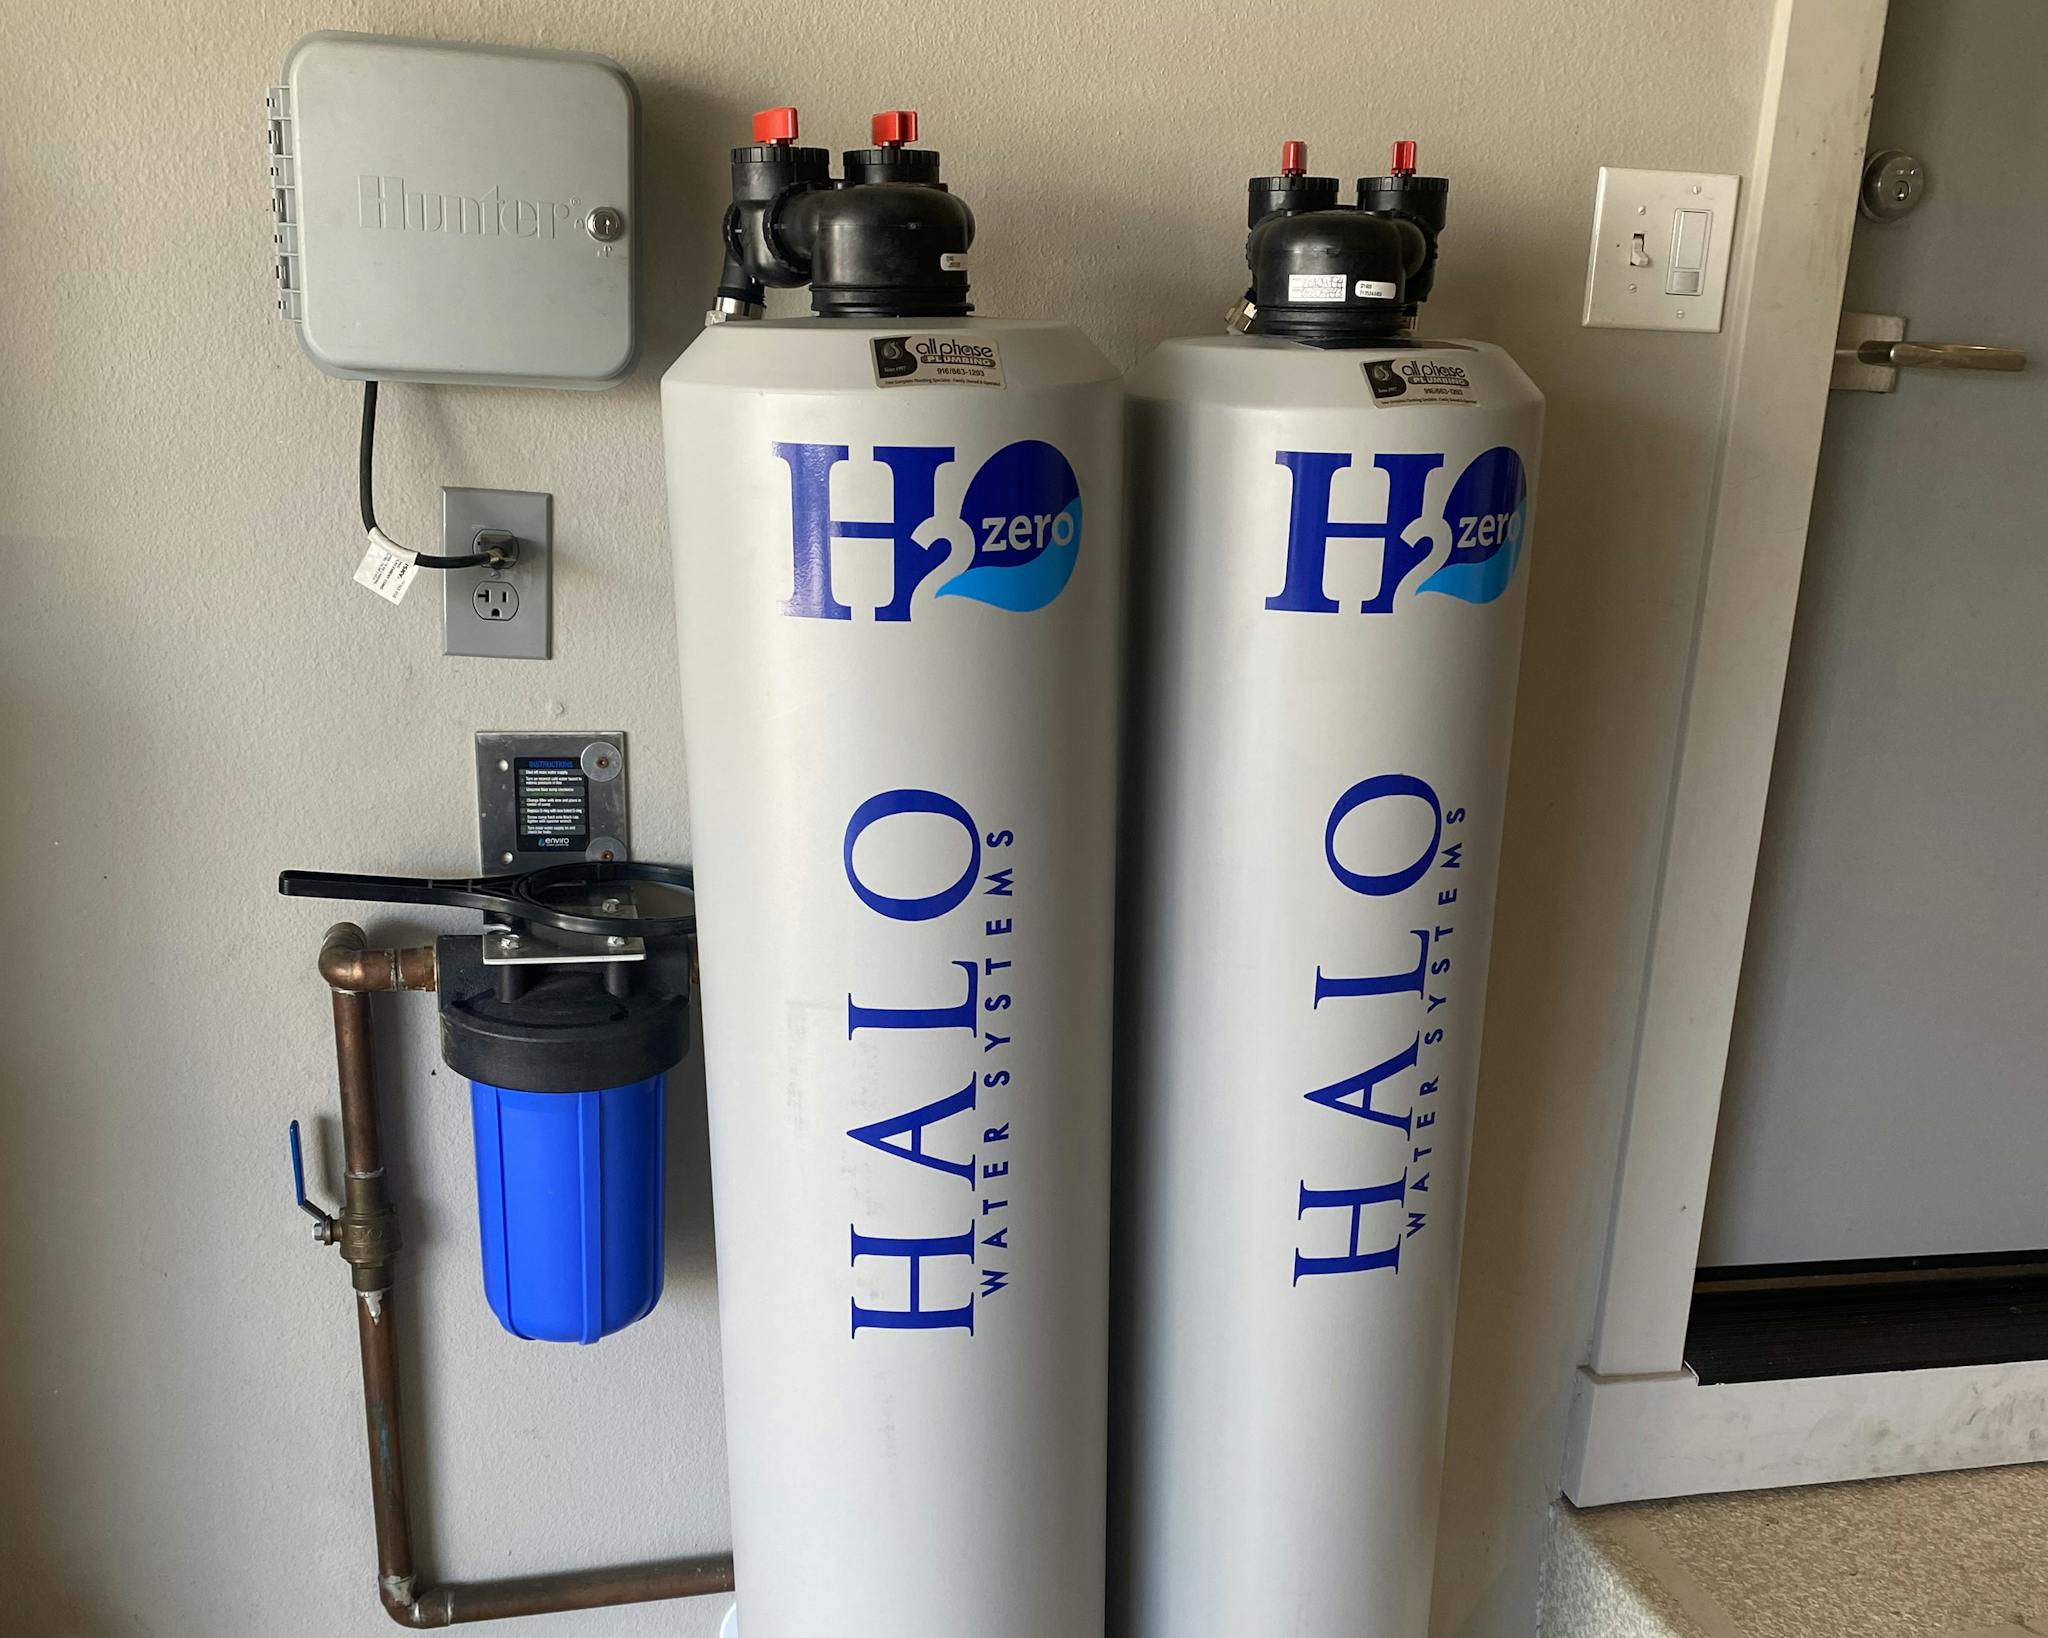 ""Two tall white cylinders labeled 'H2Ozero' and 'HALO Water Systems', placed side by side against a wall. Each cylinder has black caps with red valves. To the left, there's a smaller blue filter system connected to copper pipes and a control panel. Above the system, there's a gray electrical box on the wall.